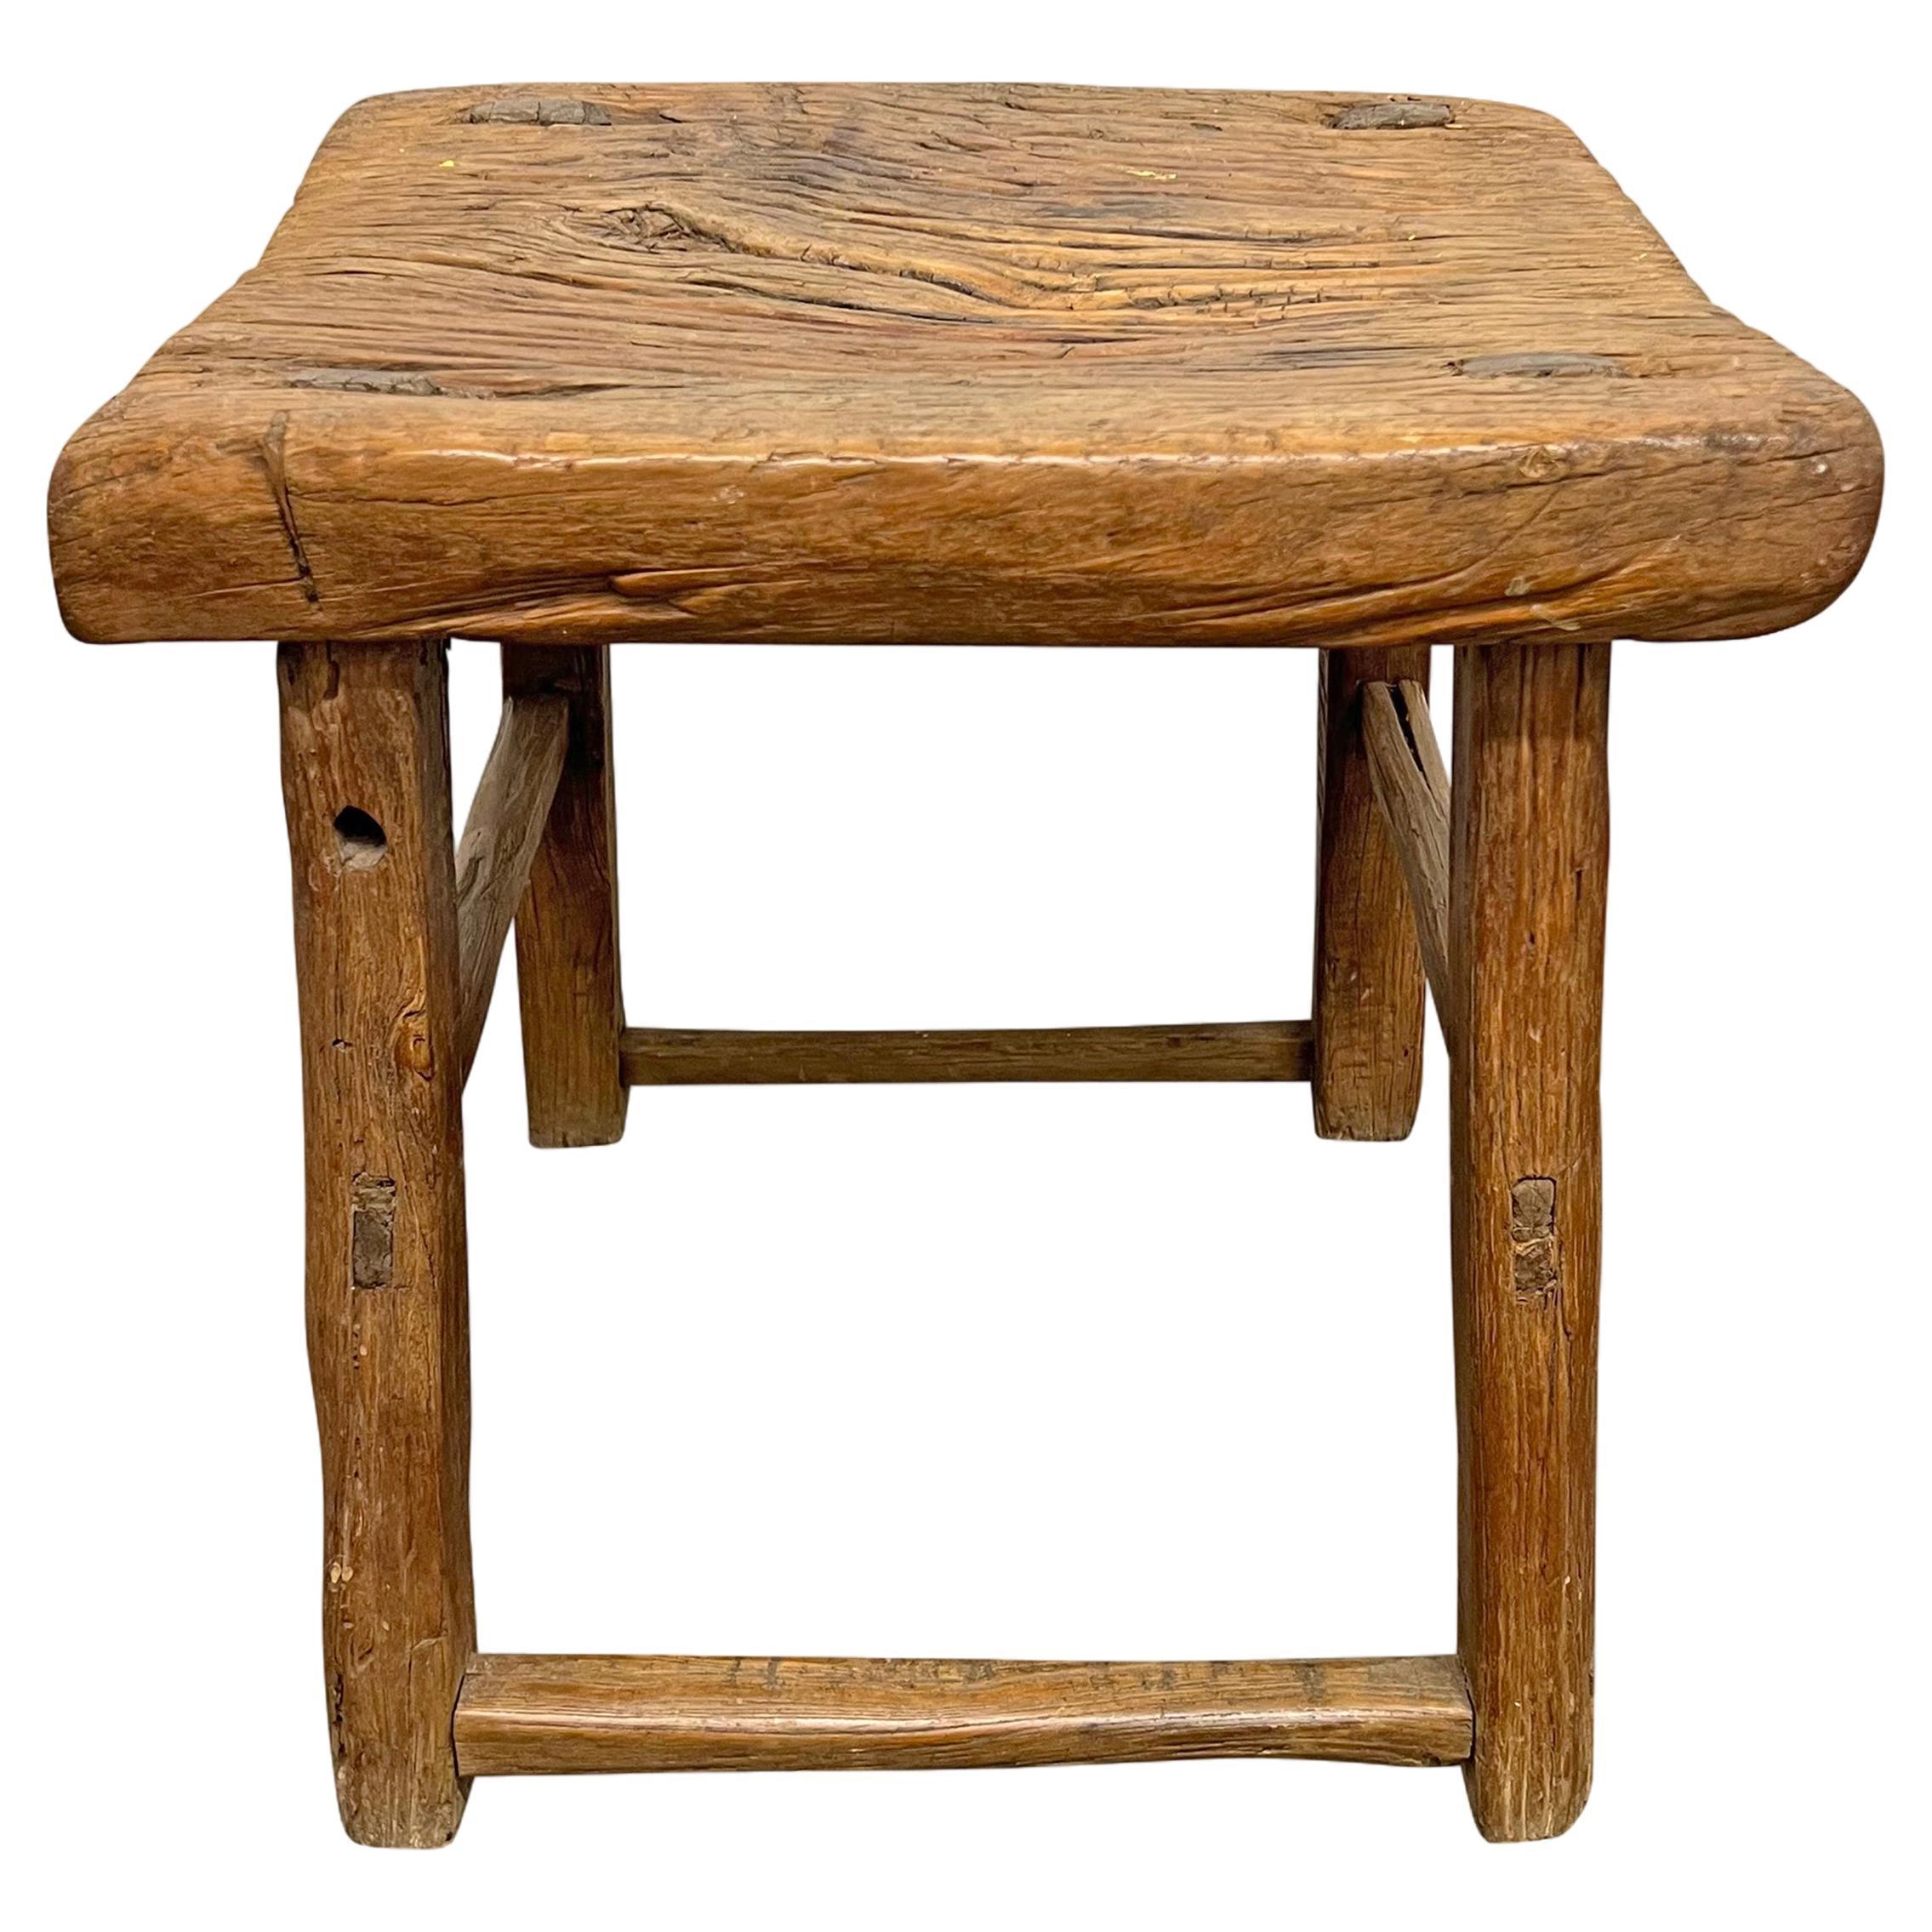 20th Century Provincial Chinese Stool or Side Table